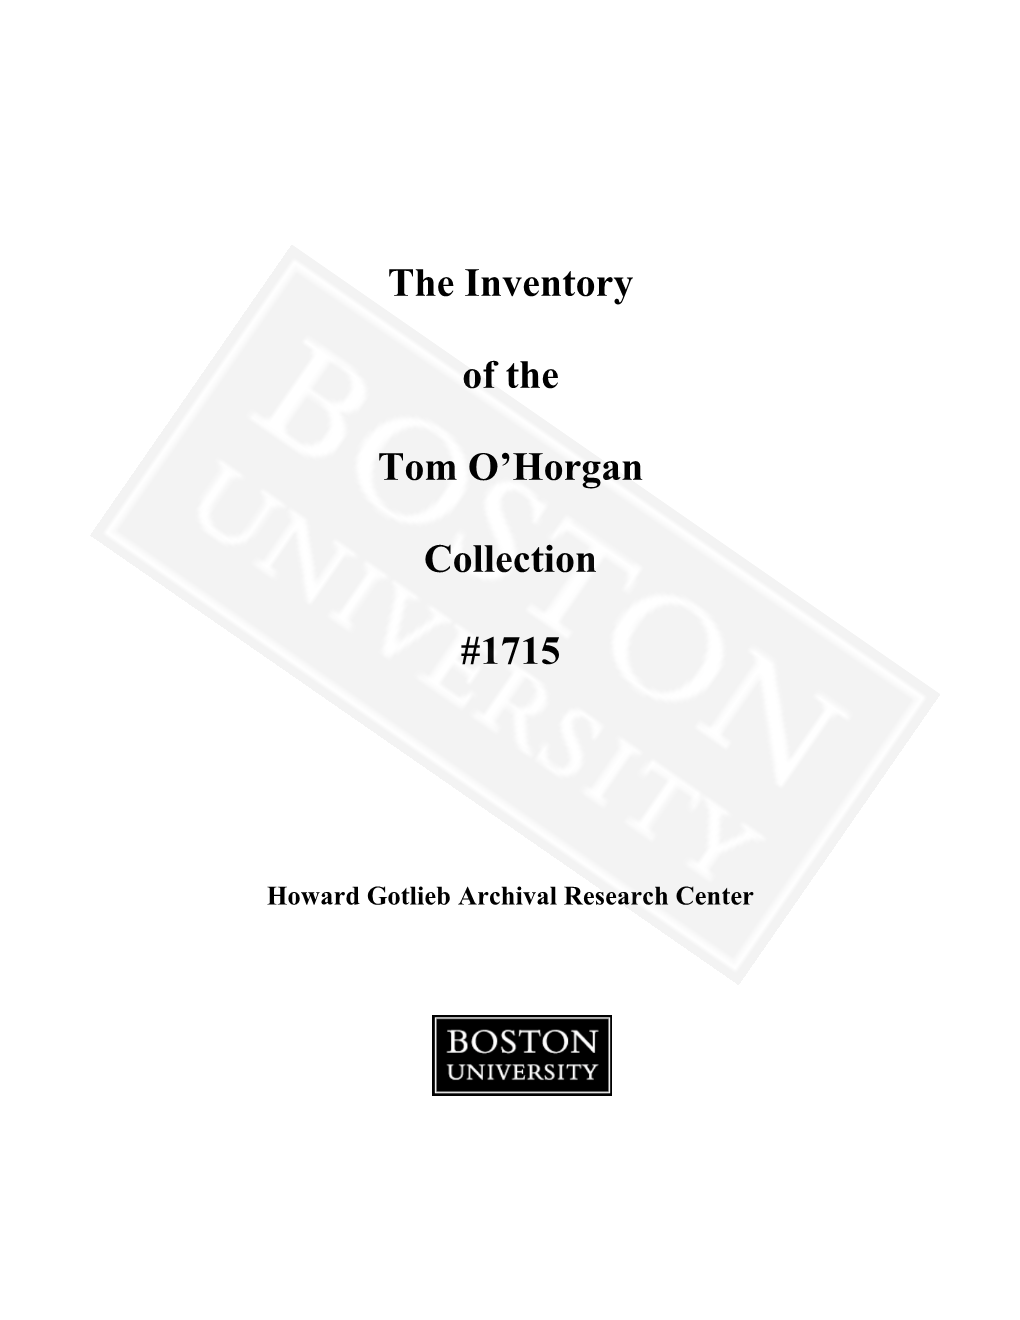 The Inventory of the Tom O'horgan Collection #1715